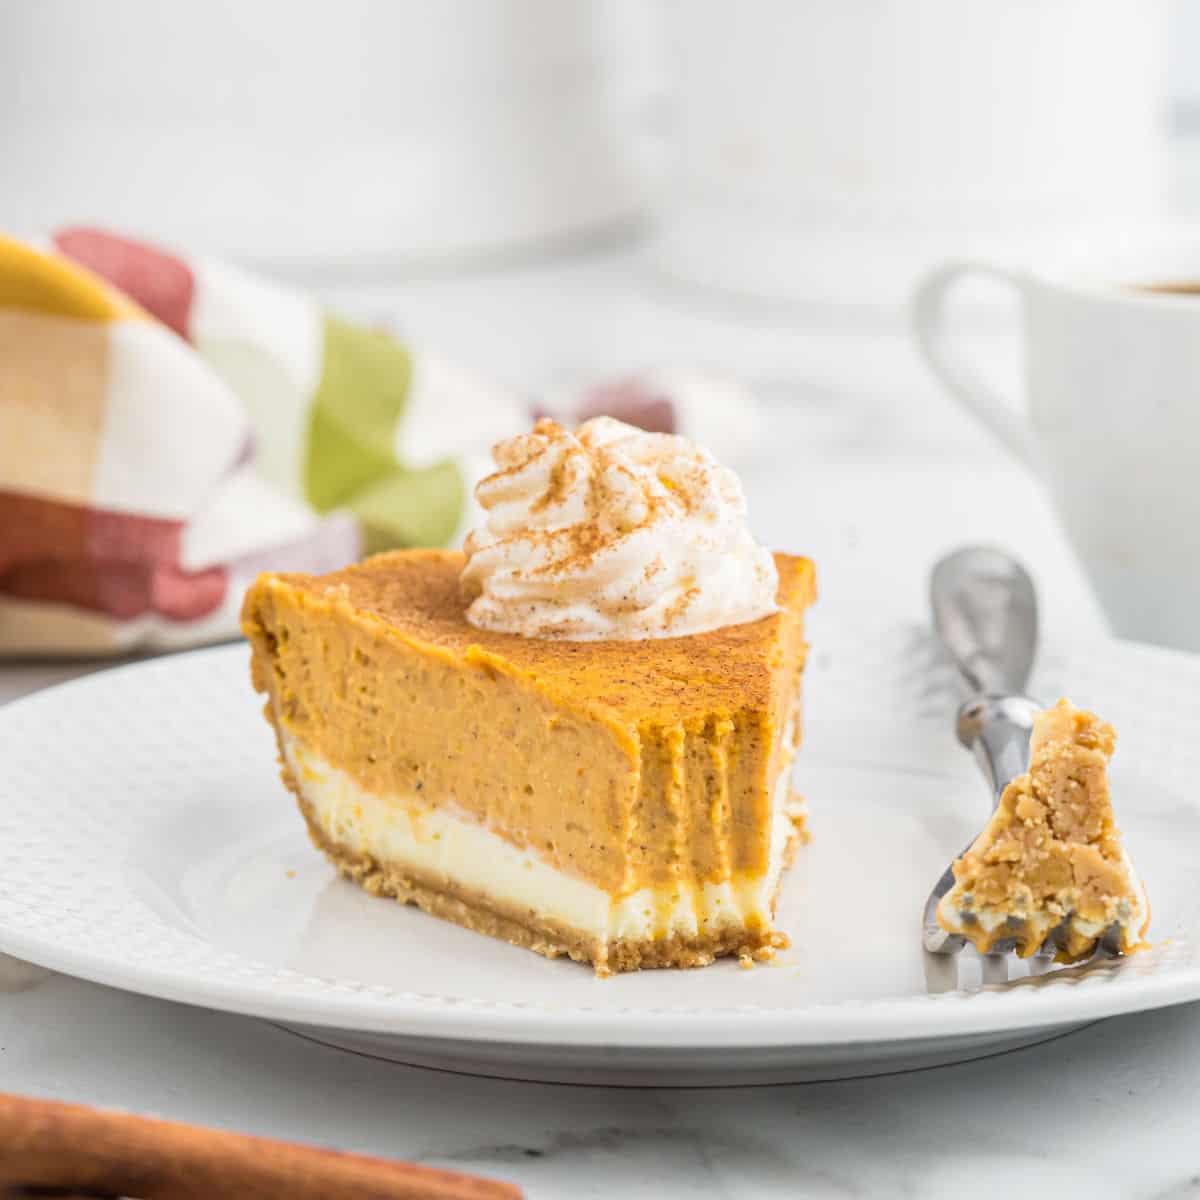 A slice of decadent pumpkin cheesecake topped with whipped cream and a sprinkle of cinnamon sits on a white plate. A fork rests next to the slice, with a bite of the cheesecake on it. The background features a colorful cloth and a white mug, enhancing the cozy autumnal vibe.